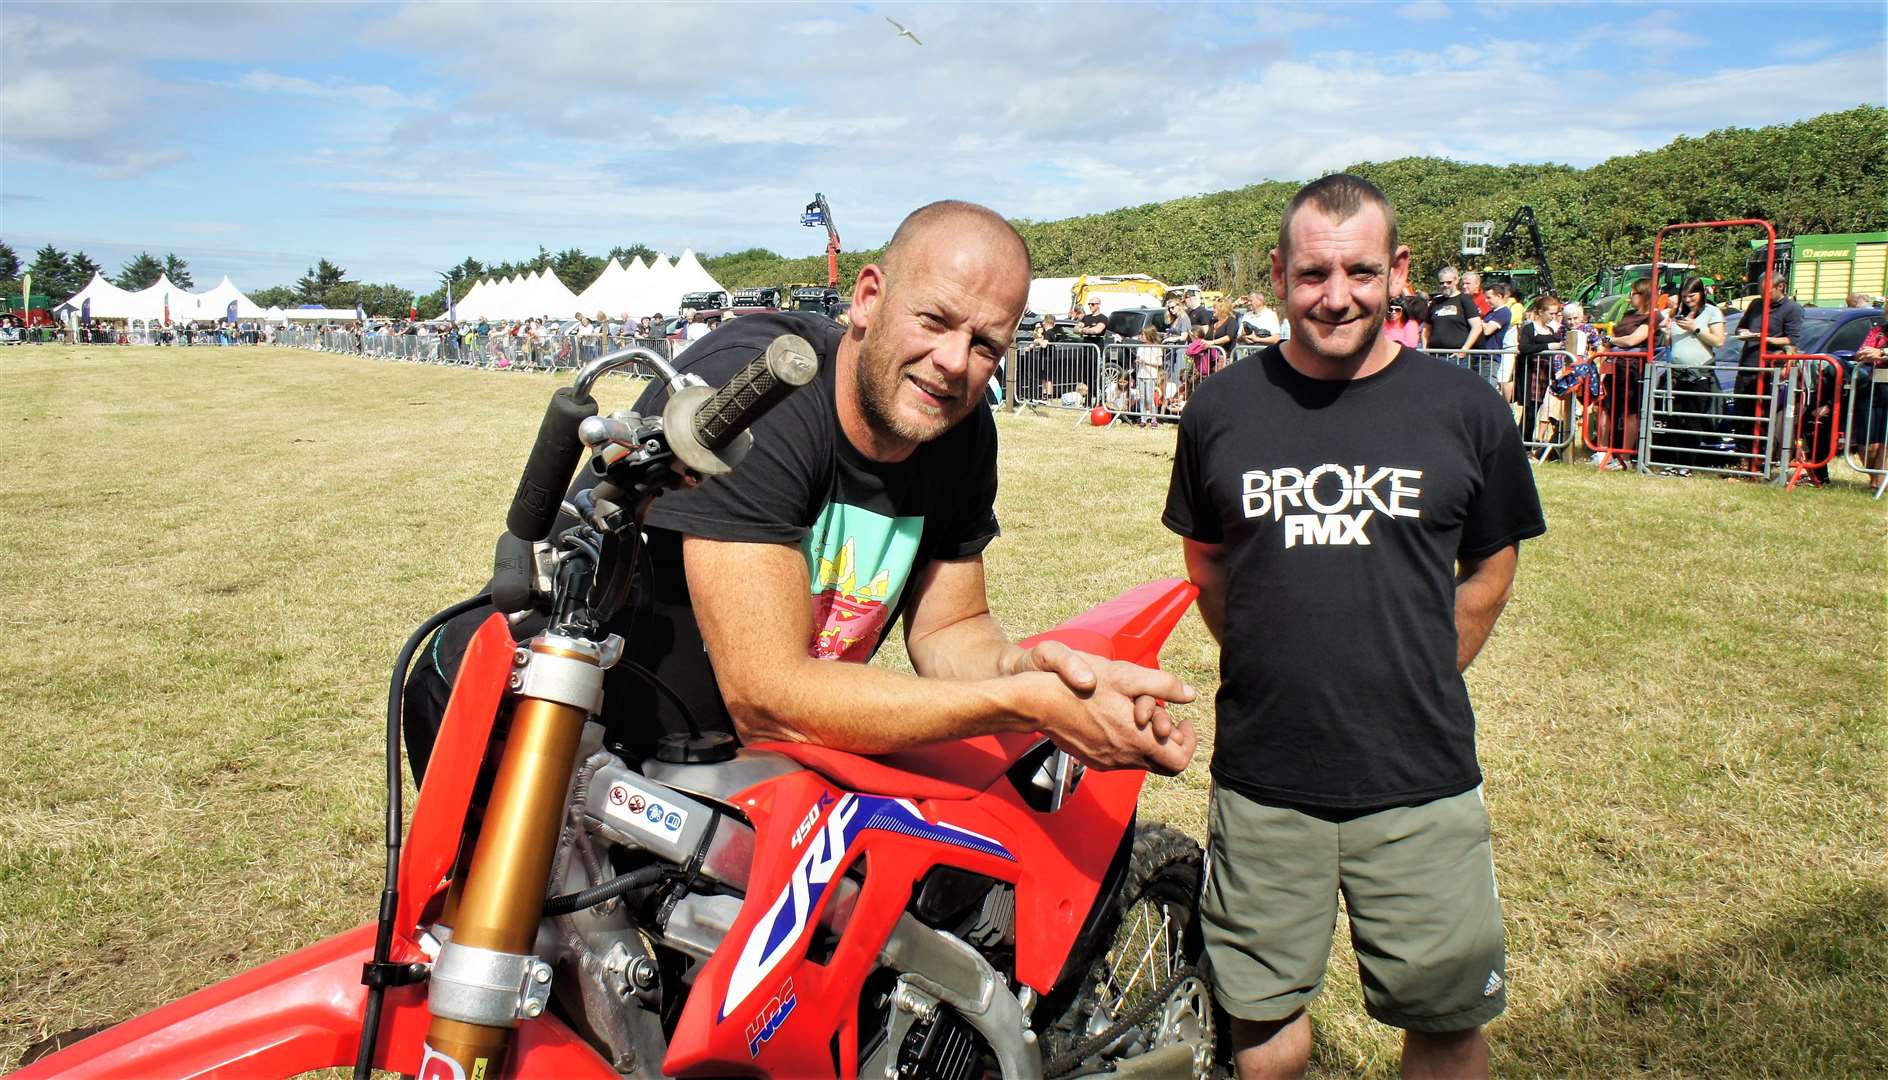 Stunt biker with Broke FMX John Pearson, left, with his safety manager James. Picture: DGS